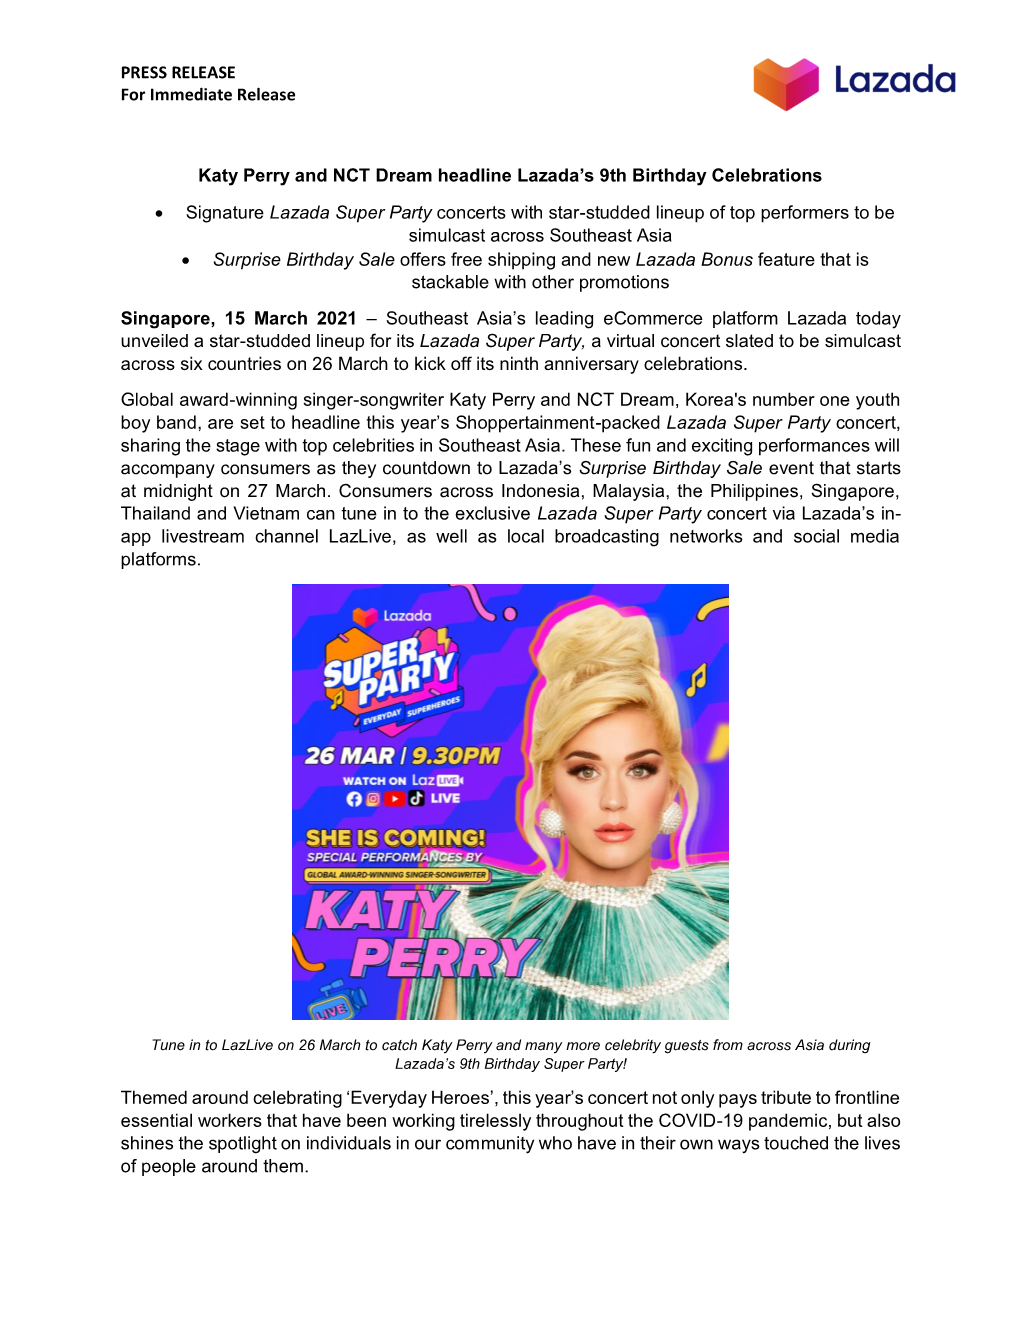 PRESS RELEASE for Immediate Release Katy Perry and NCT